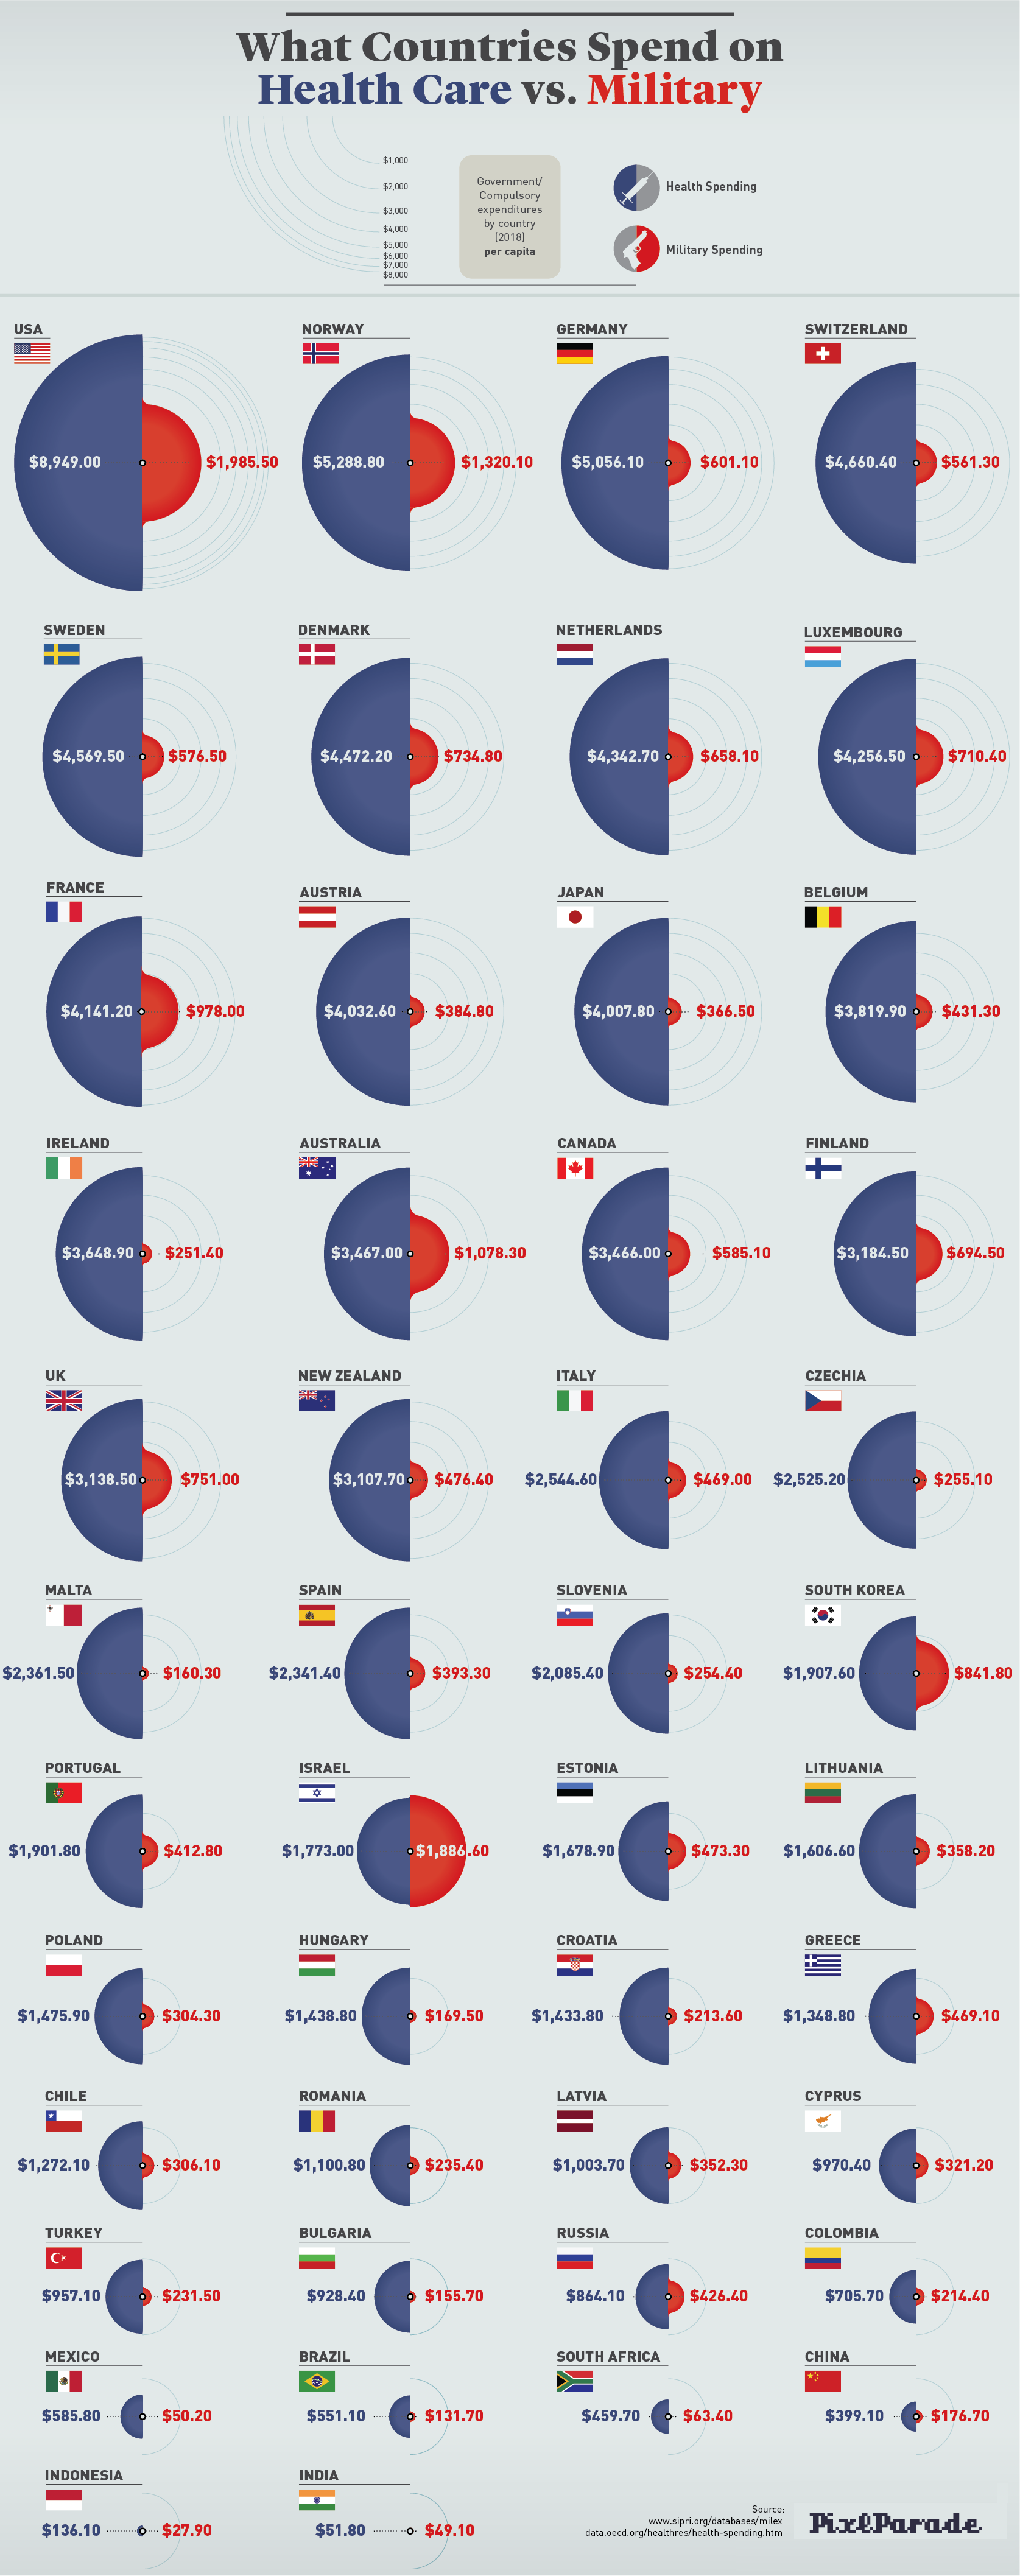 What Countries Spend on Health Care vs. Military - PixlParade.com - Infographic